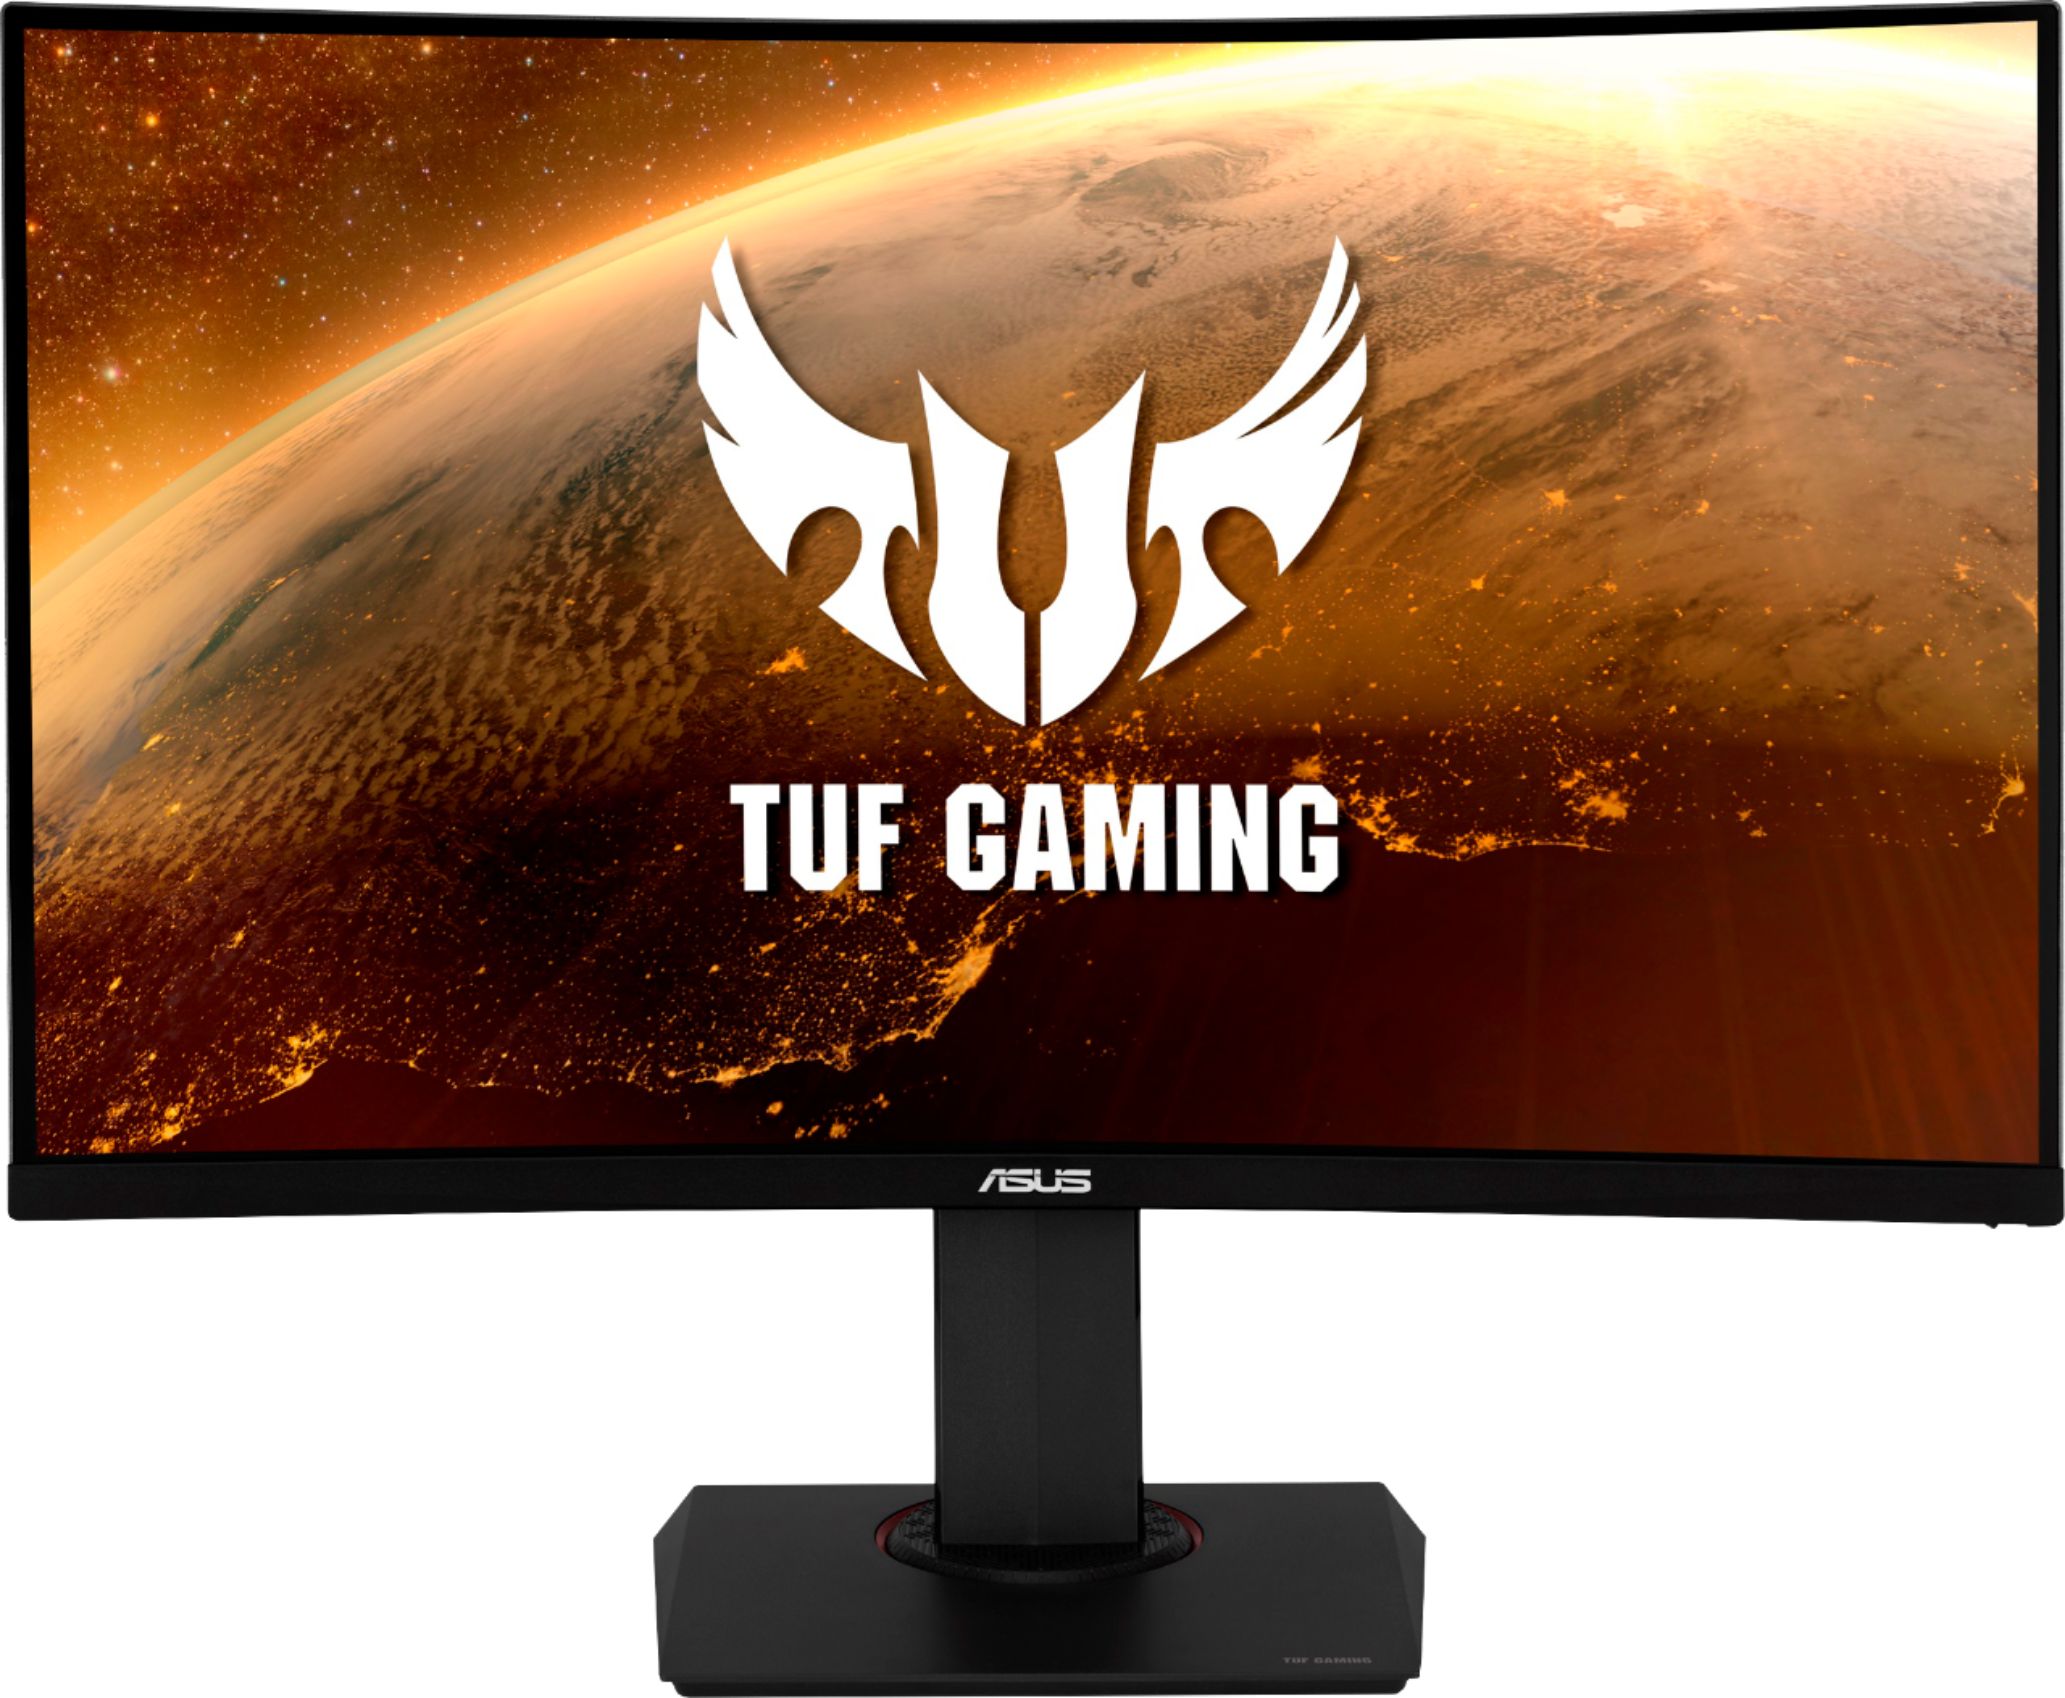 Angle View: ASUS - Geek Squad Certified Refurbished TUF Gaming 31.5" LED QHD FreeSync Monitor with HDR (DisplayPort, HDMI)